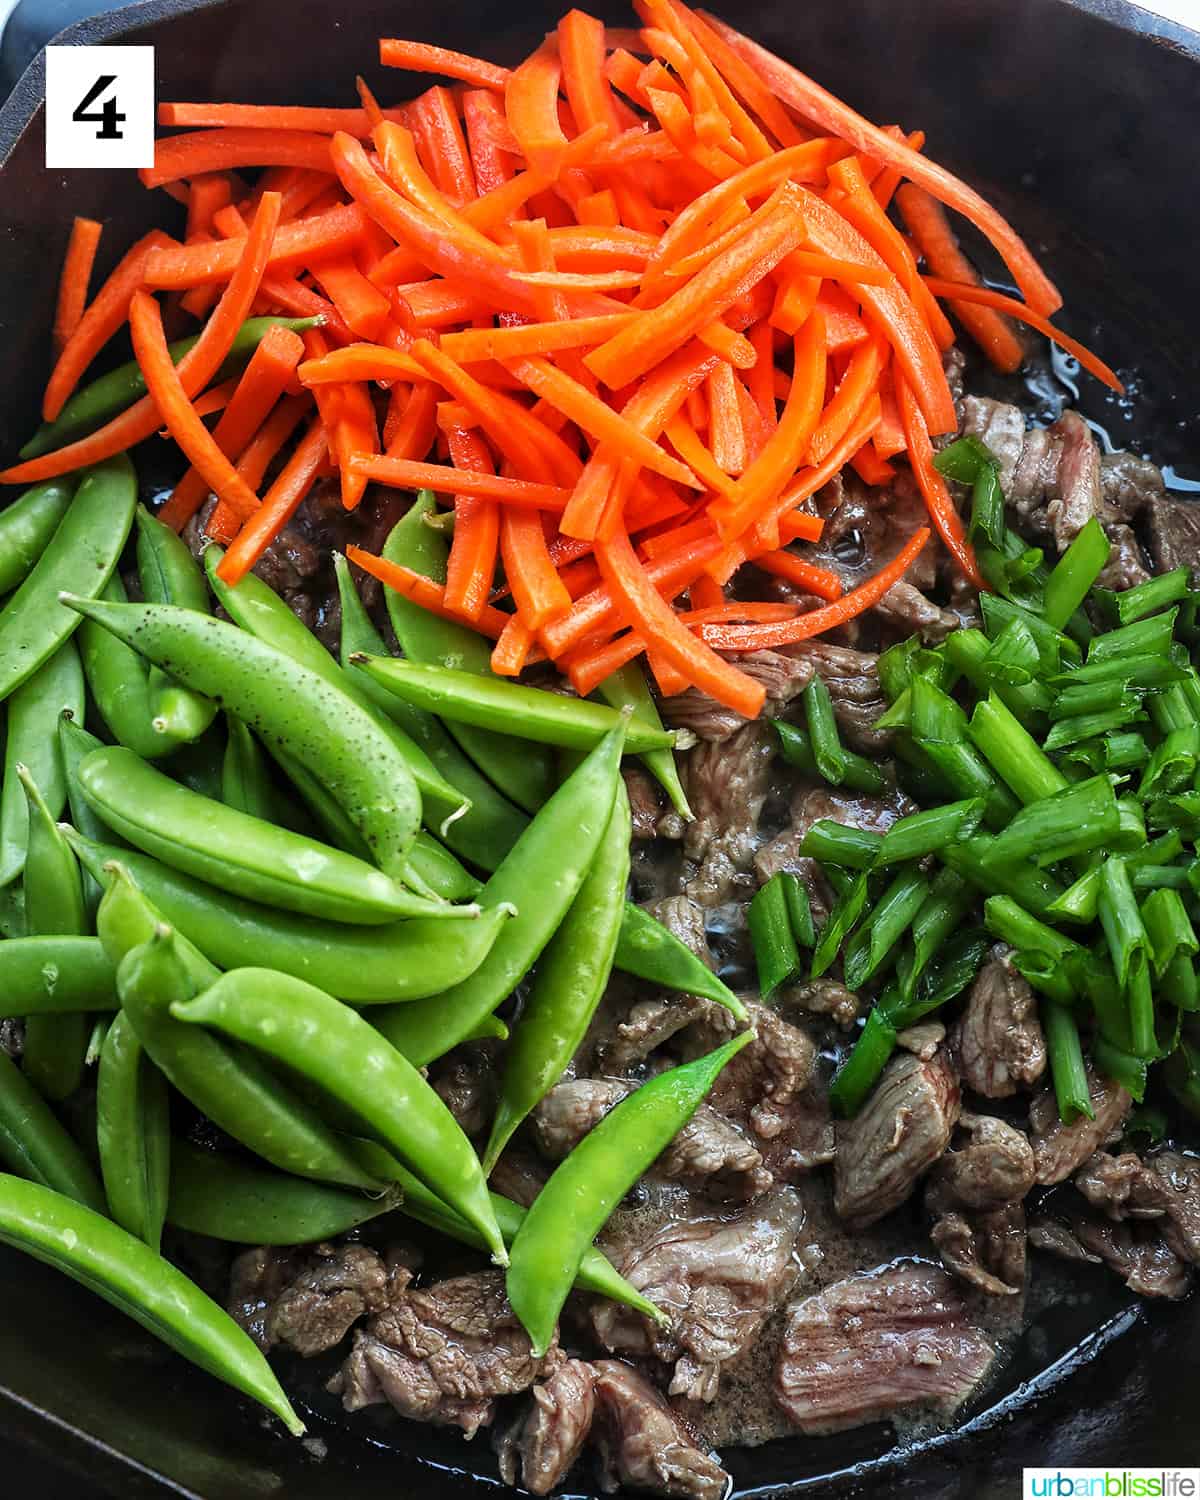 snap peas, carrots, scallions, and steak in a cast iron skillet.